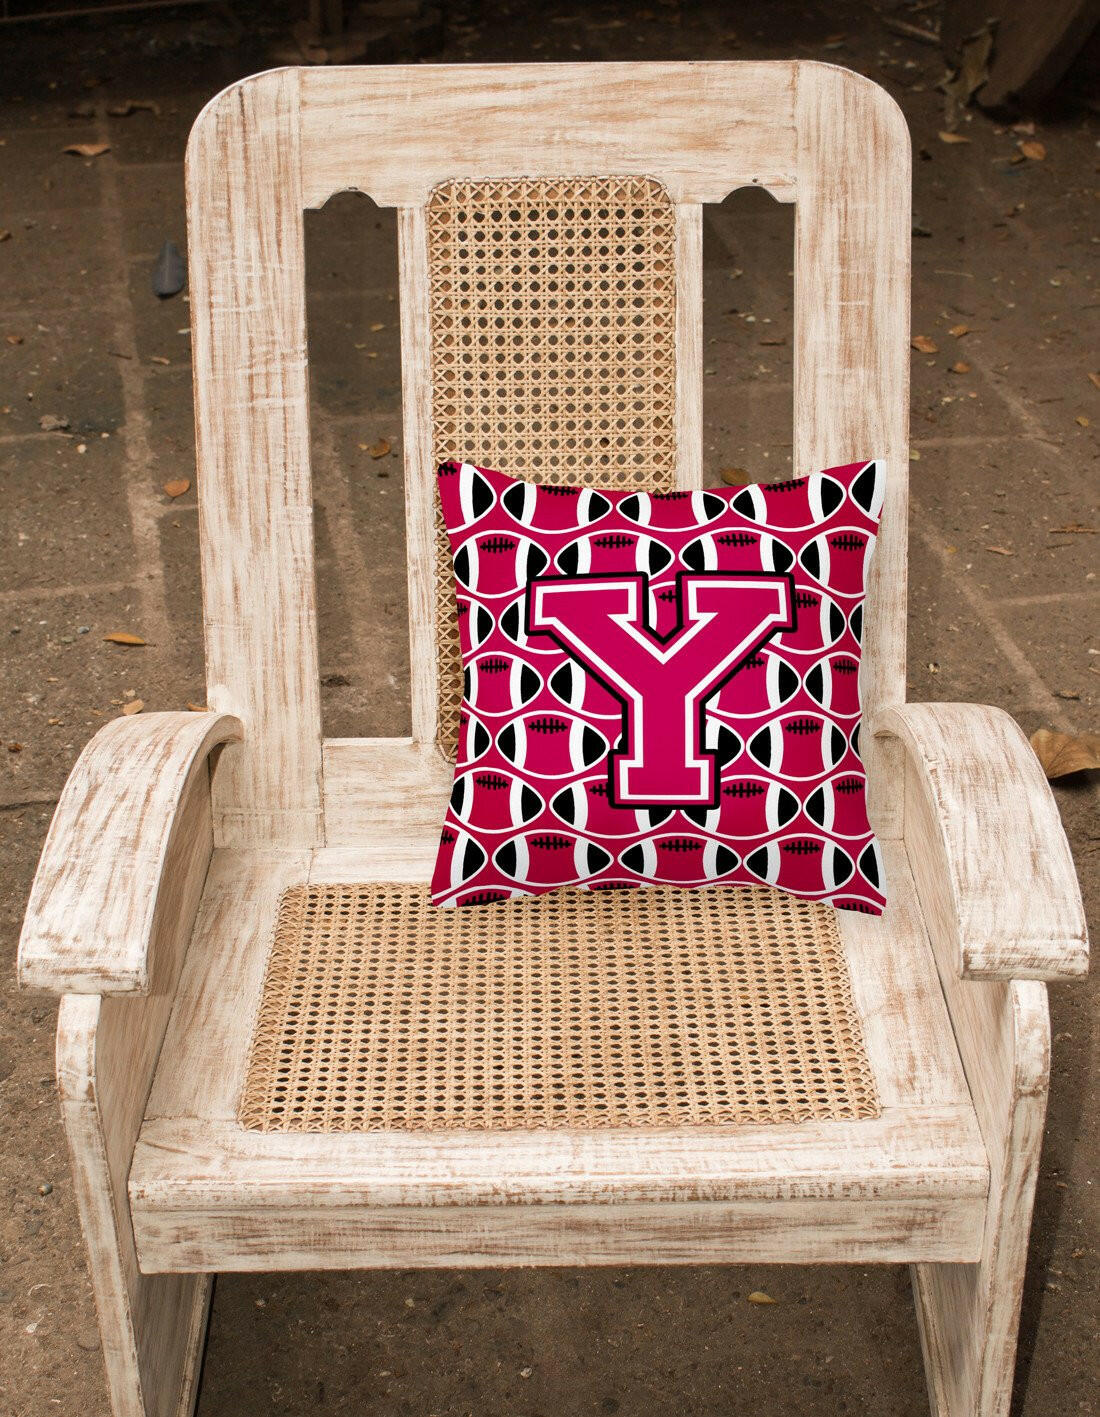 Letter Y Football Crimson and White Fabric Decorative Pillow CJ1079-YPW1414 by Caroline's Treasures